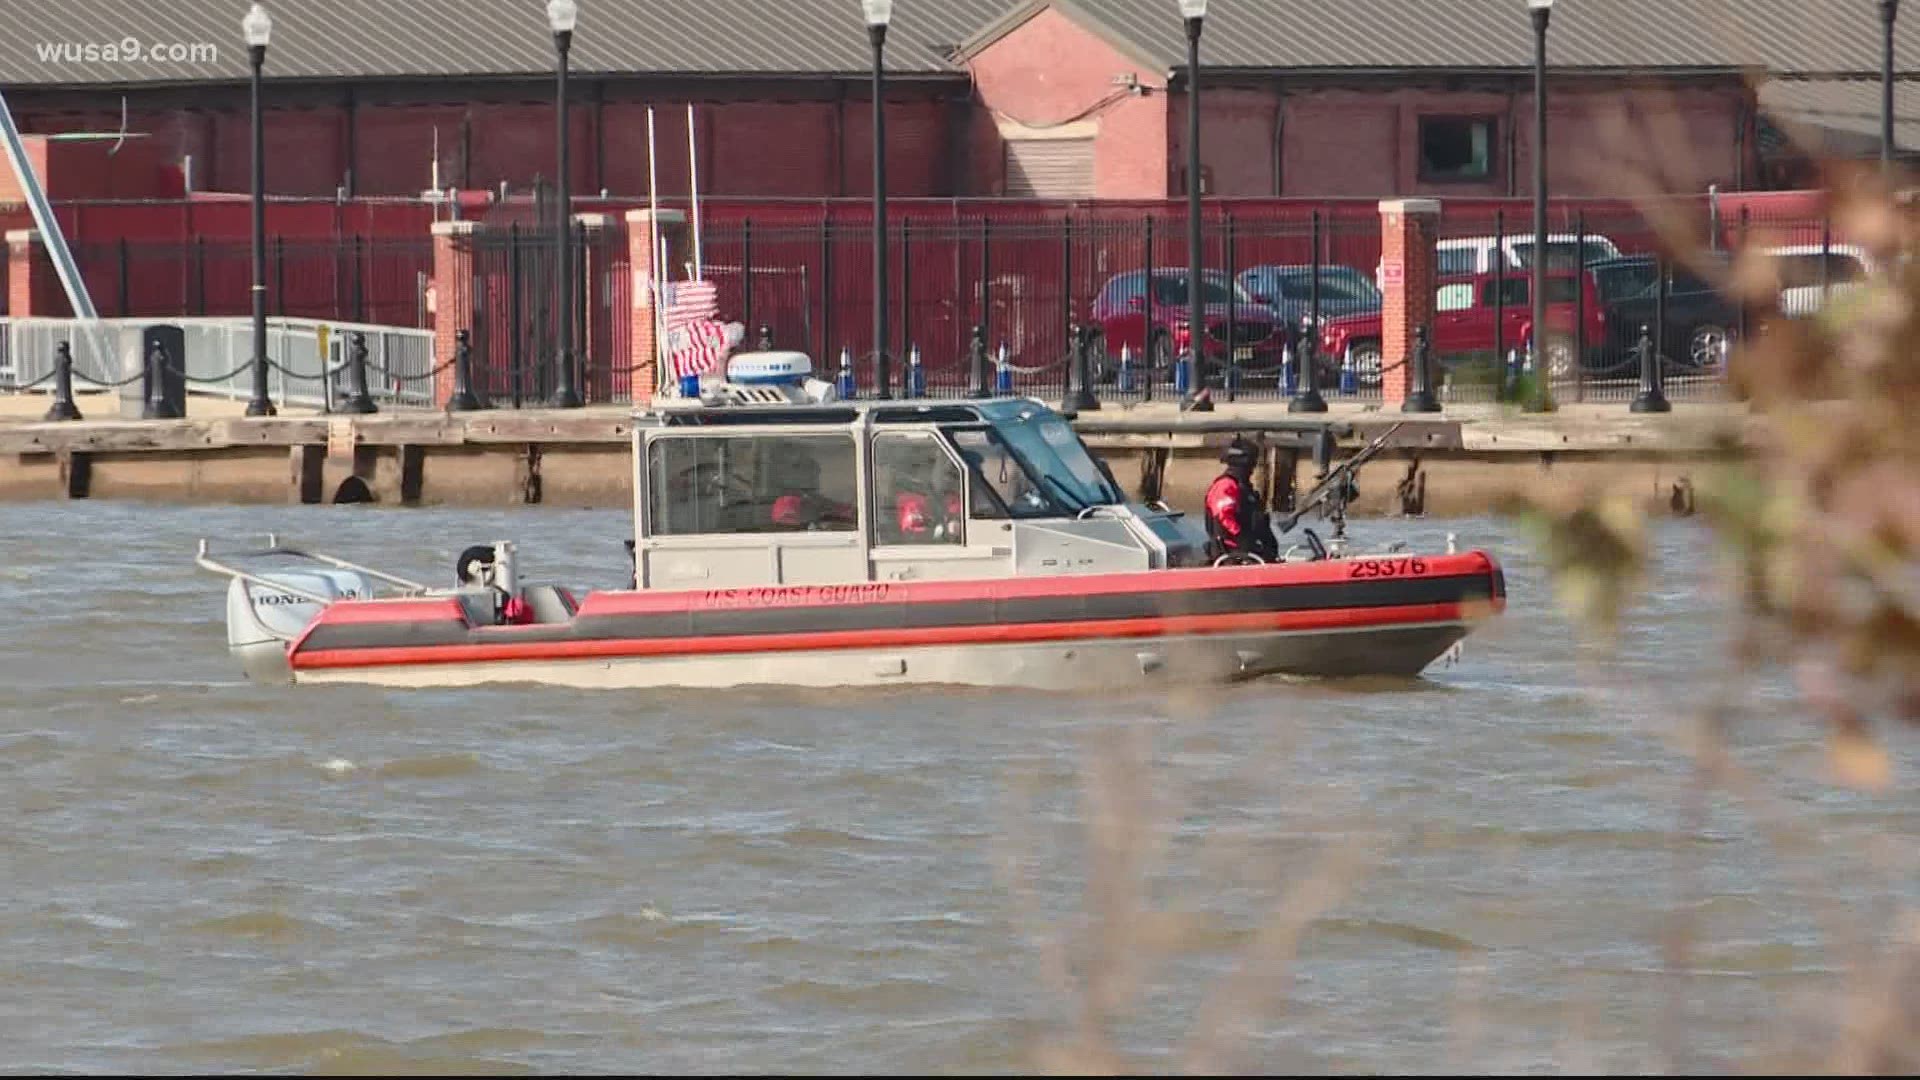 After a Virginia woman reports men in pick-ups and camouflage with kayaks headed north, Coast Guard commander says he's ready, but has no intel on specific threats.